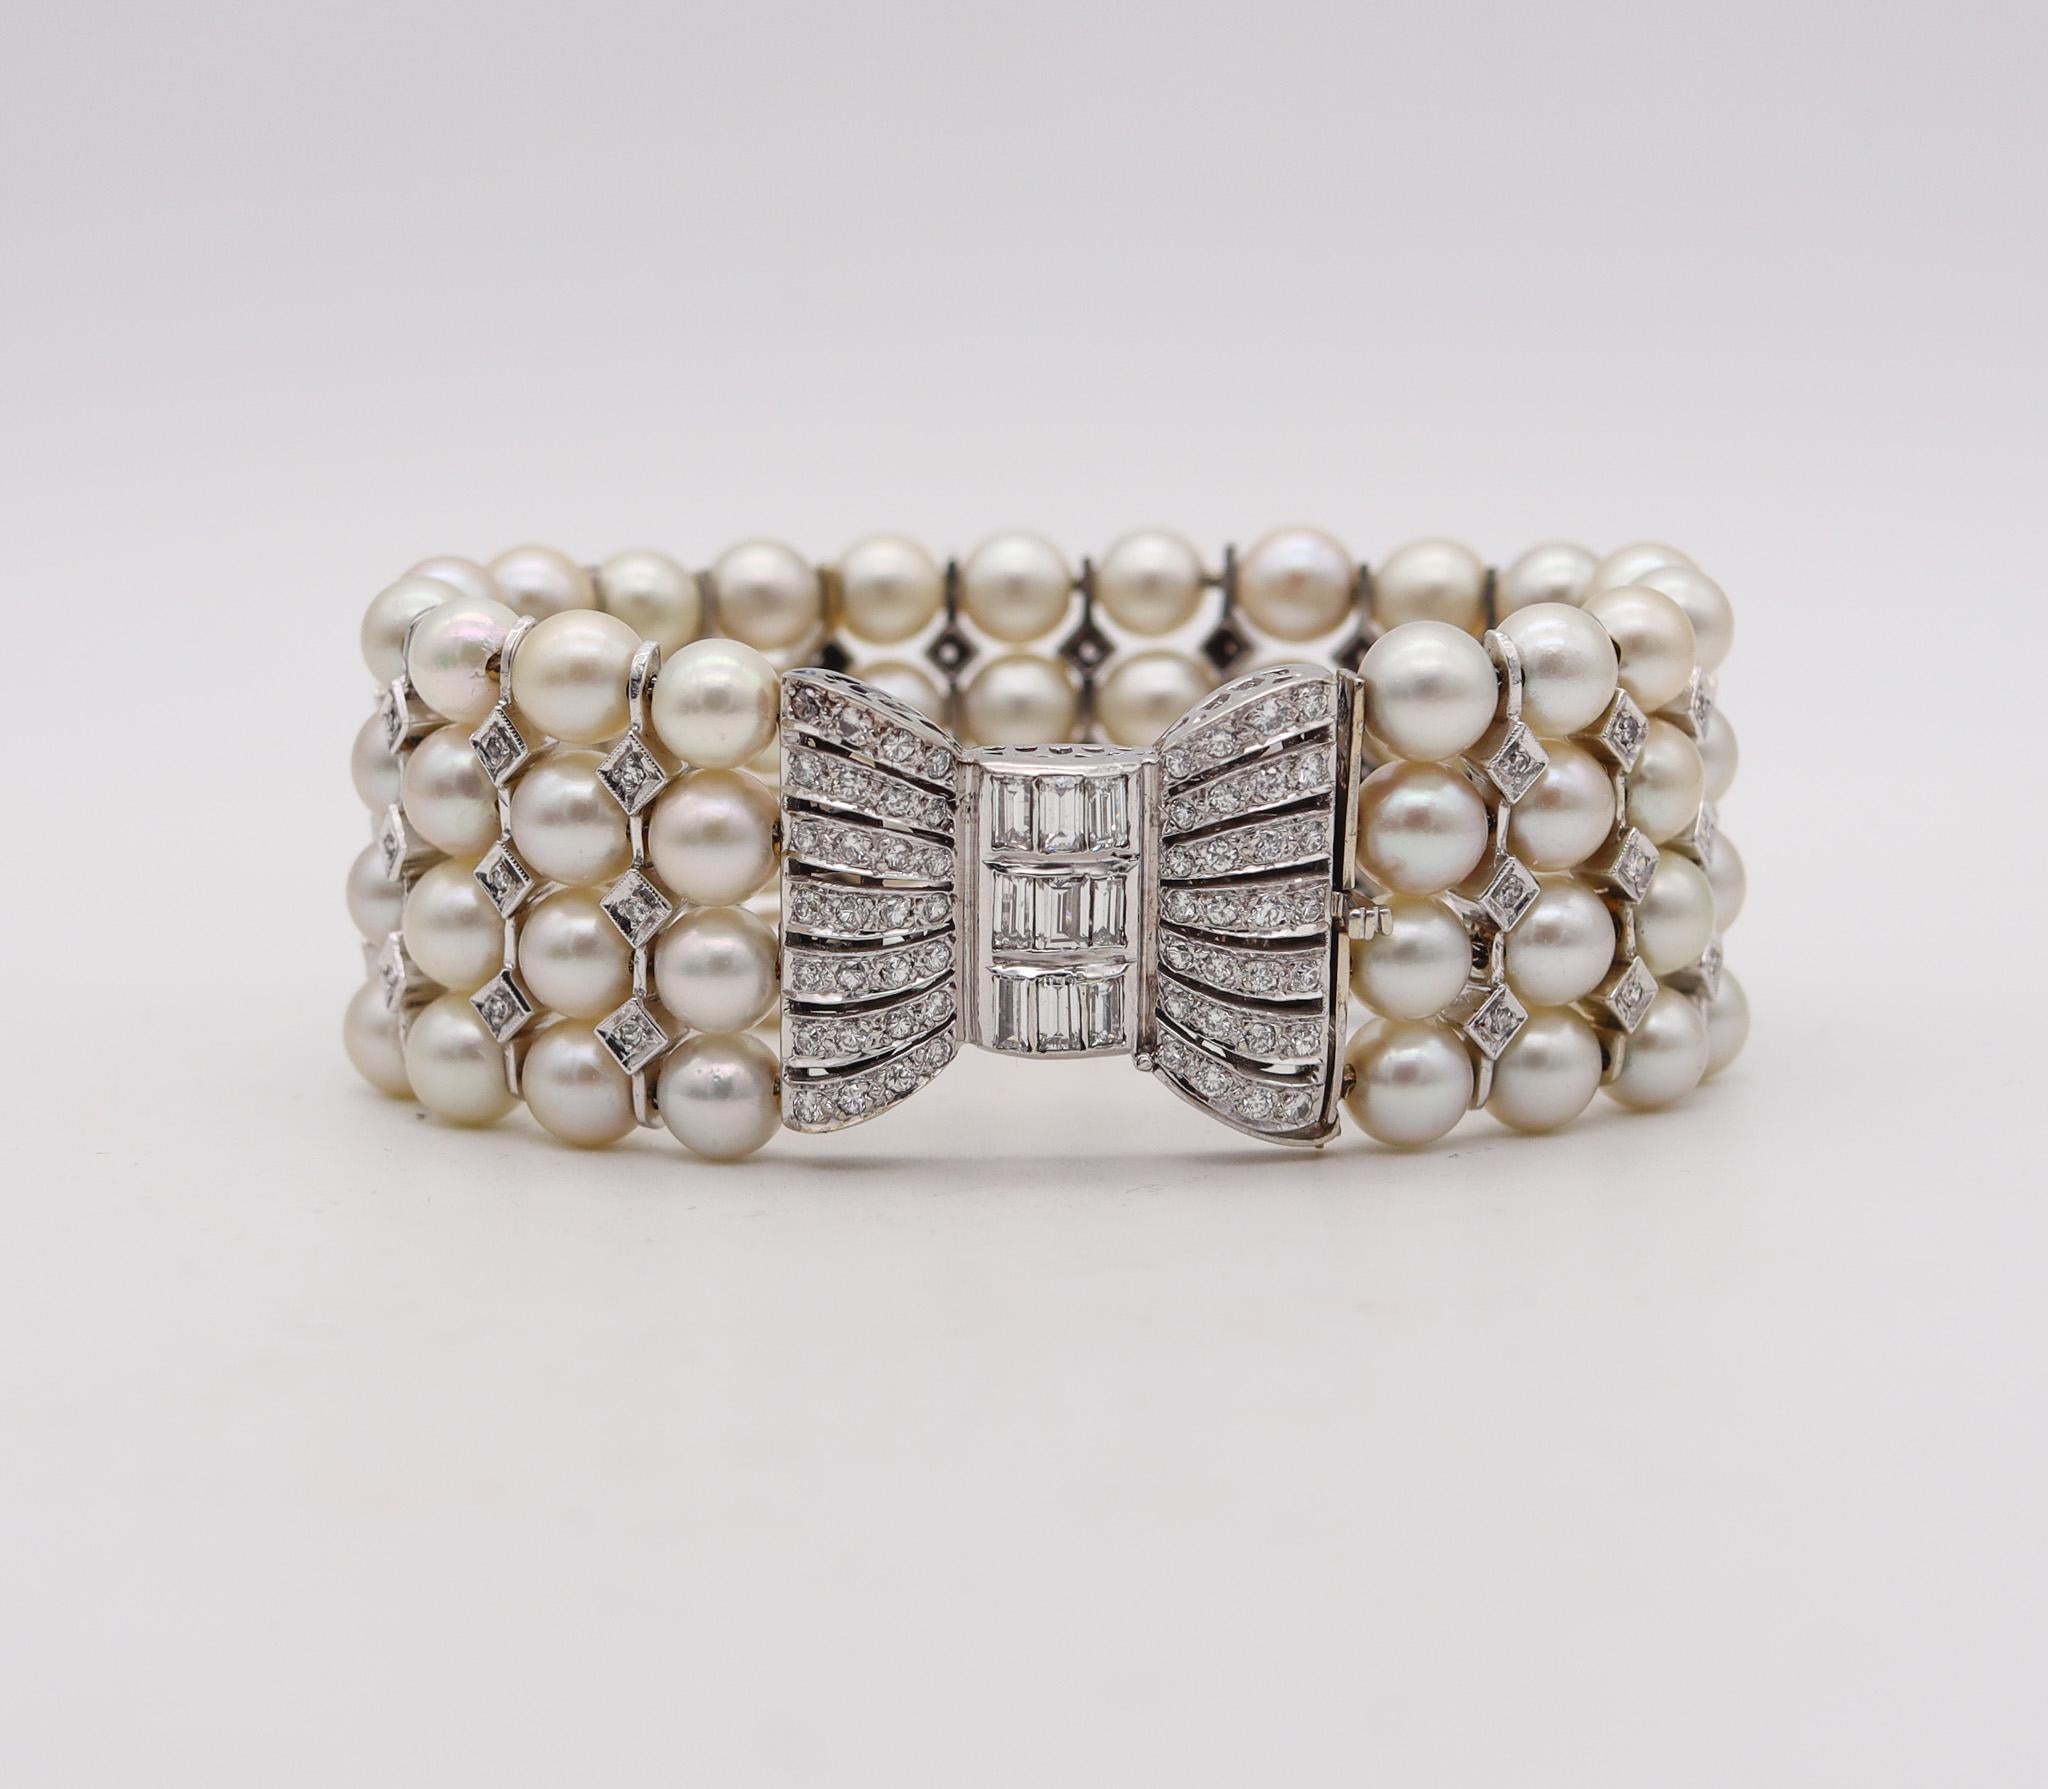 Art deco bracelet with pearls.

Gorgeous bracelet, created in America at the climax of the art deco period, back in the 1930's. It was carefully crafted with impeccable details with diamonds stations in solid platinum and embellished with one